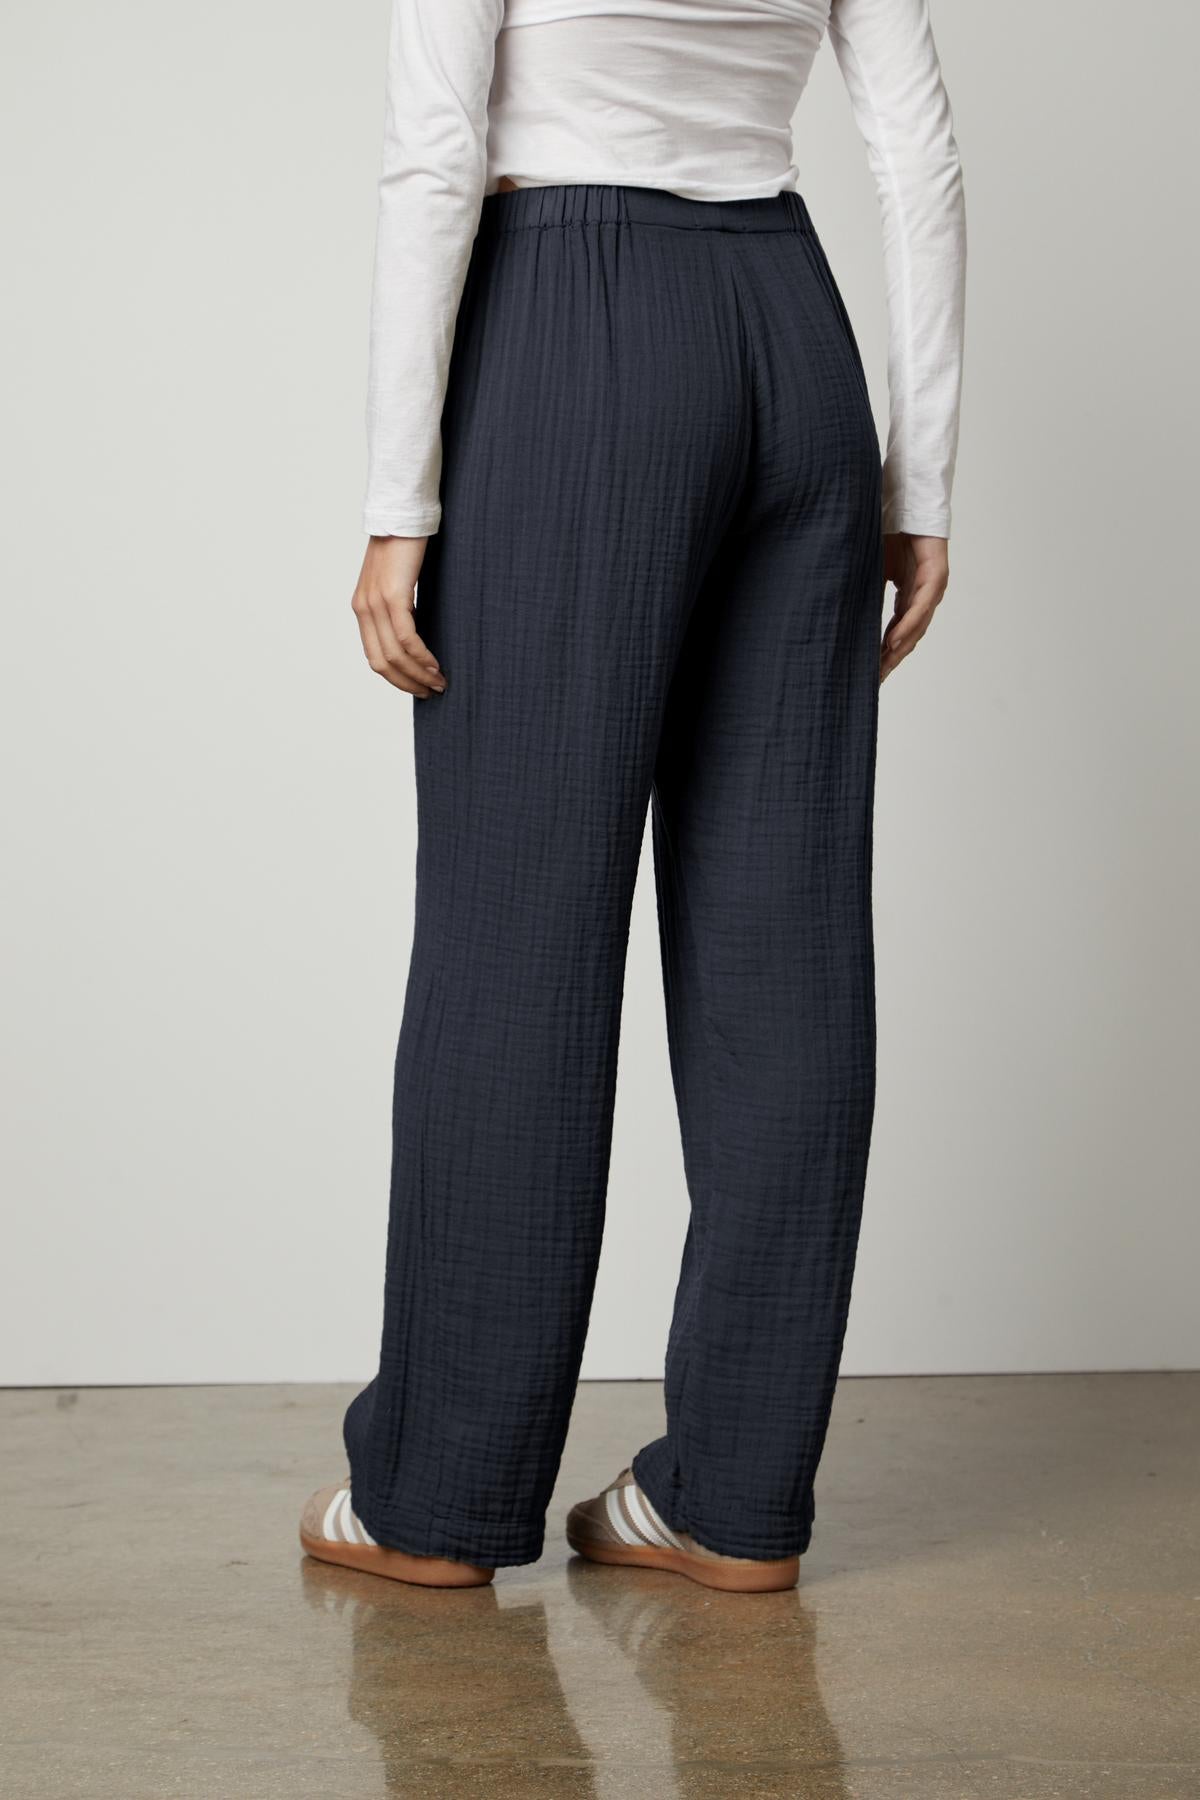 Woman wearing JERRY COTTON GAUZE PANT from Velvet by Graham & Spencer with an elastic waistband and white top against a neutral background.-36462913650881